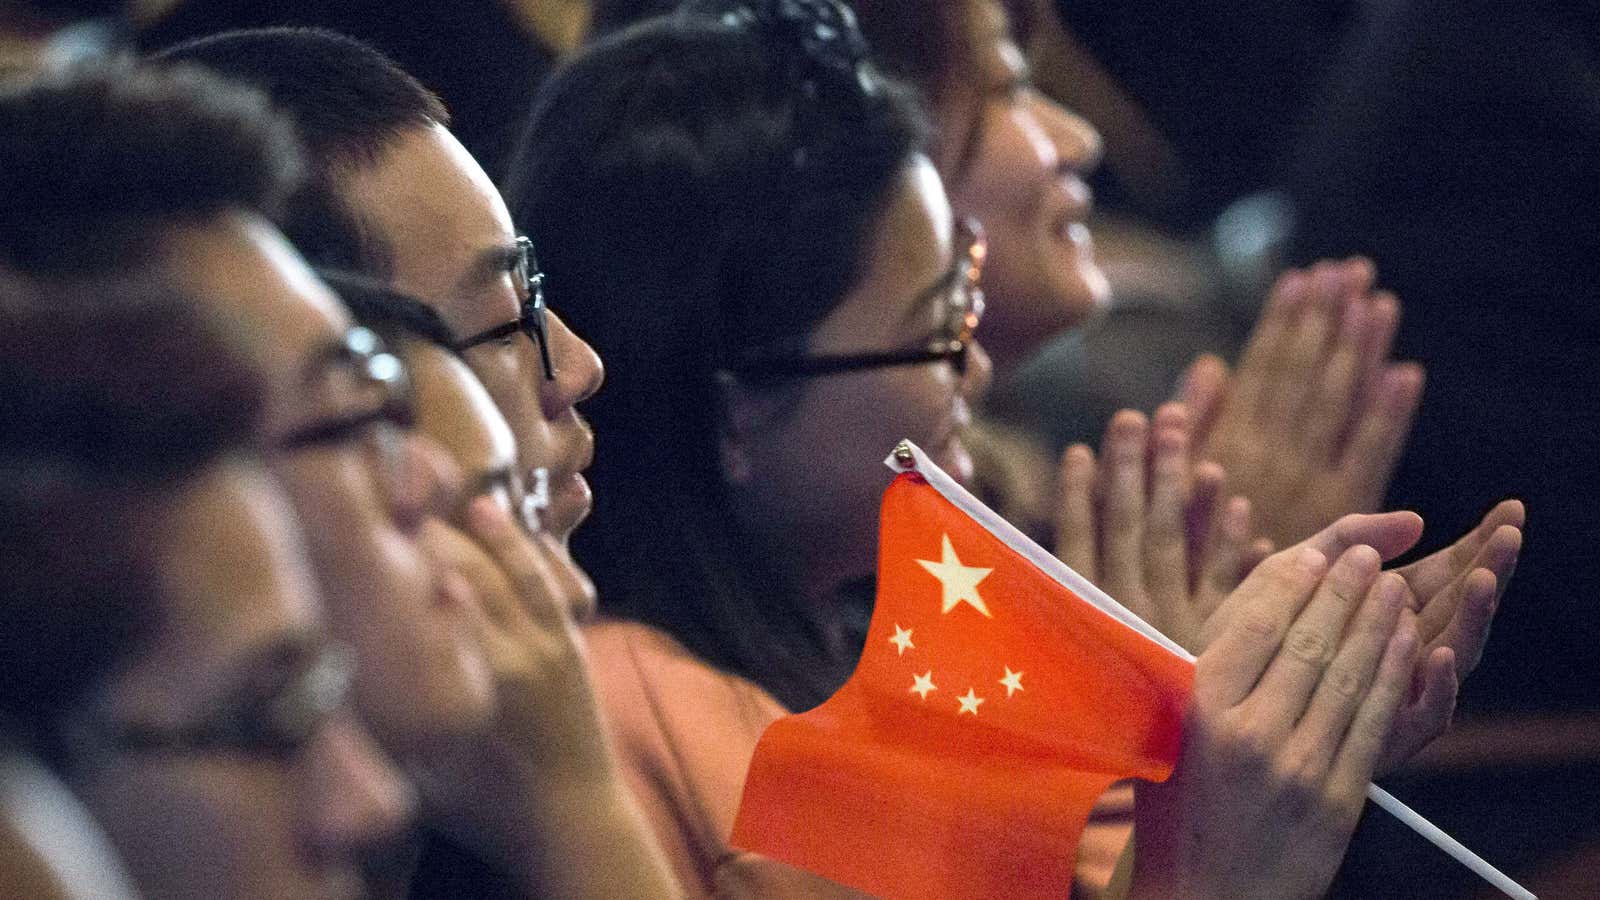 Chinese students listen to a speech by Xi Jinping.